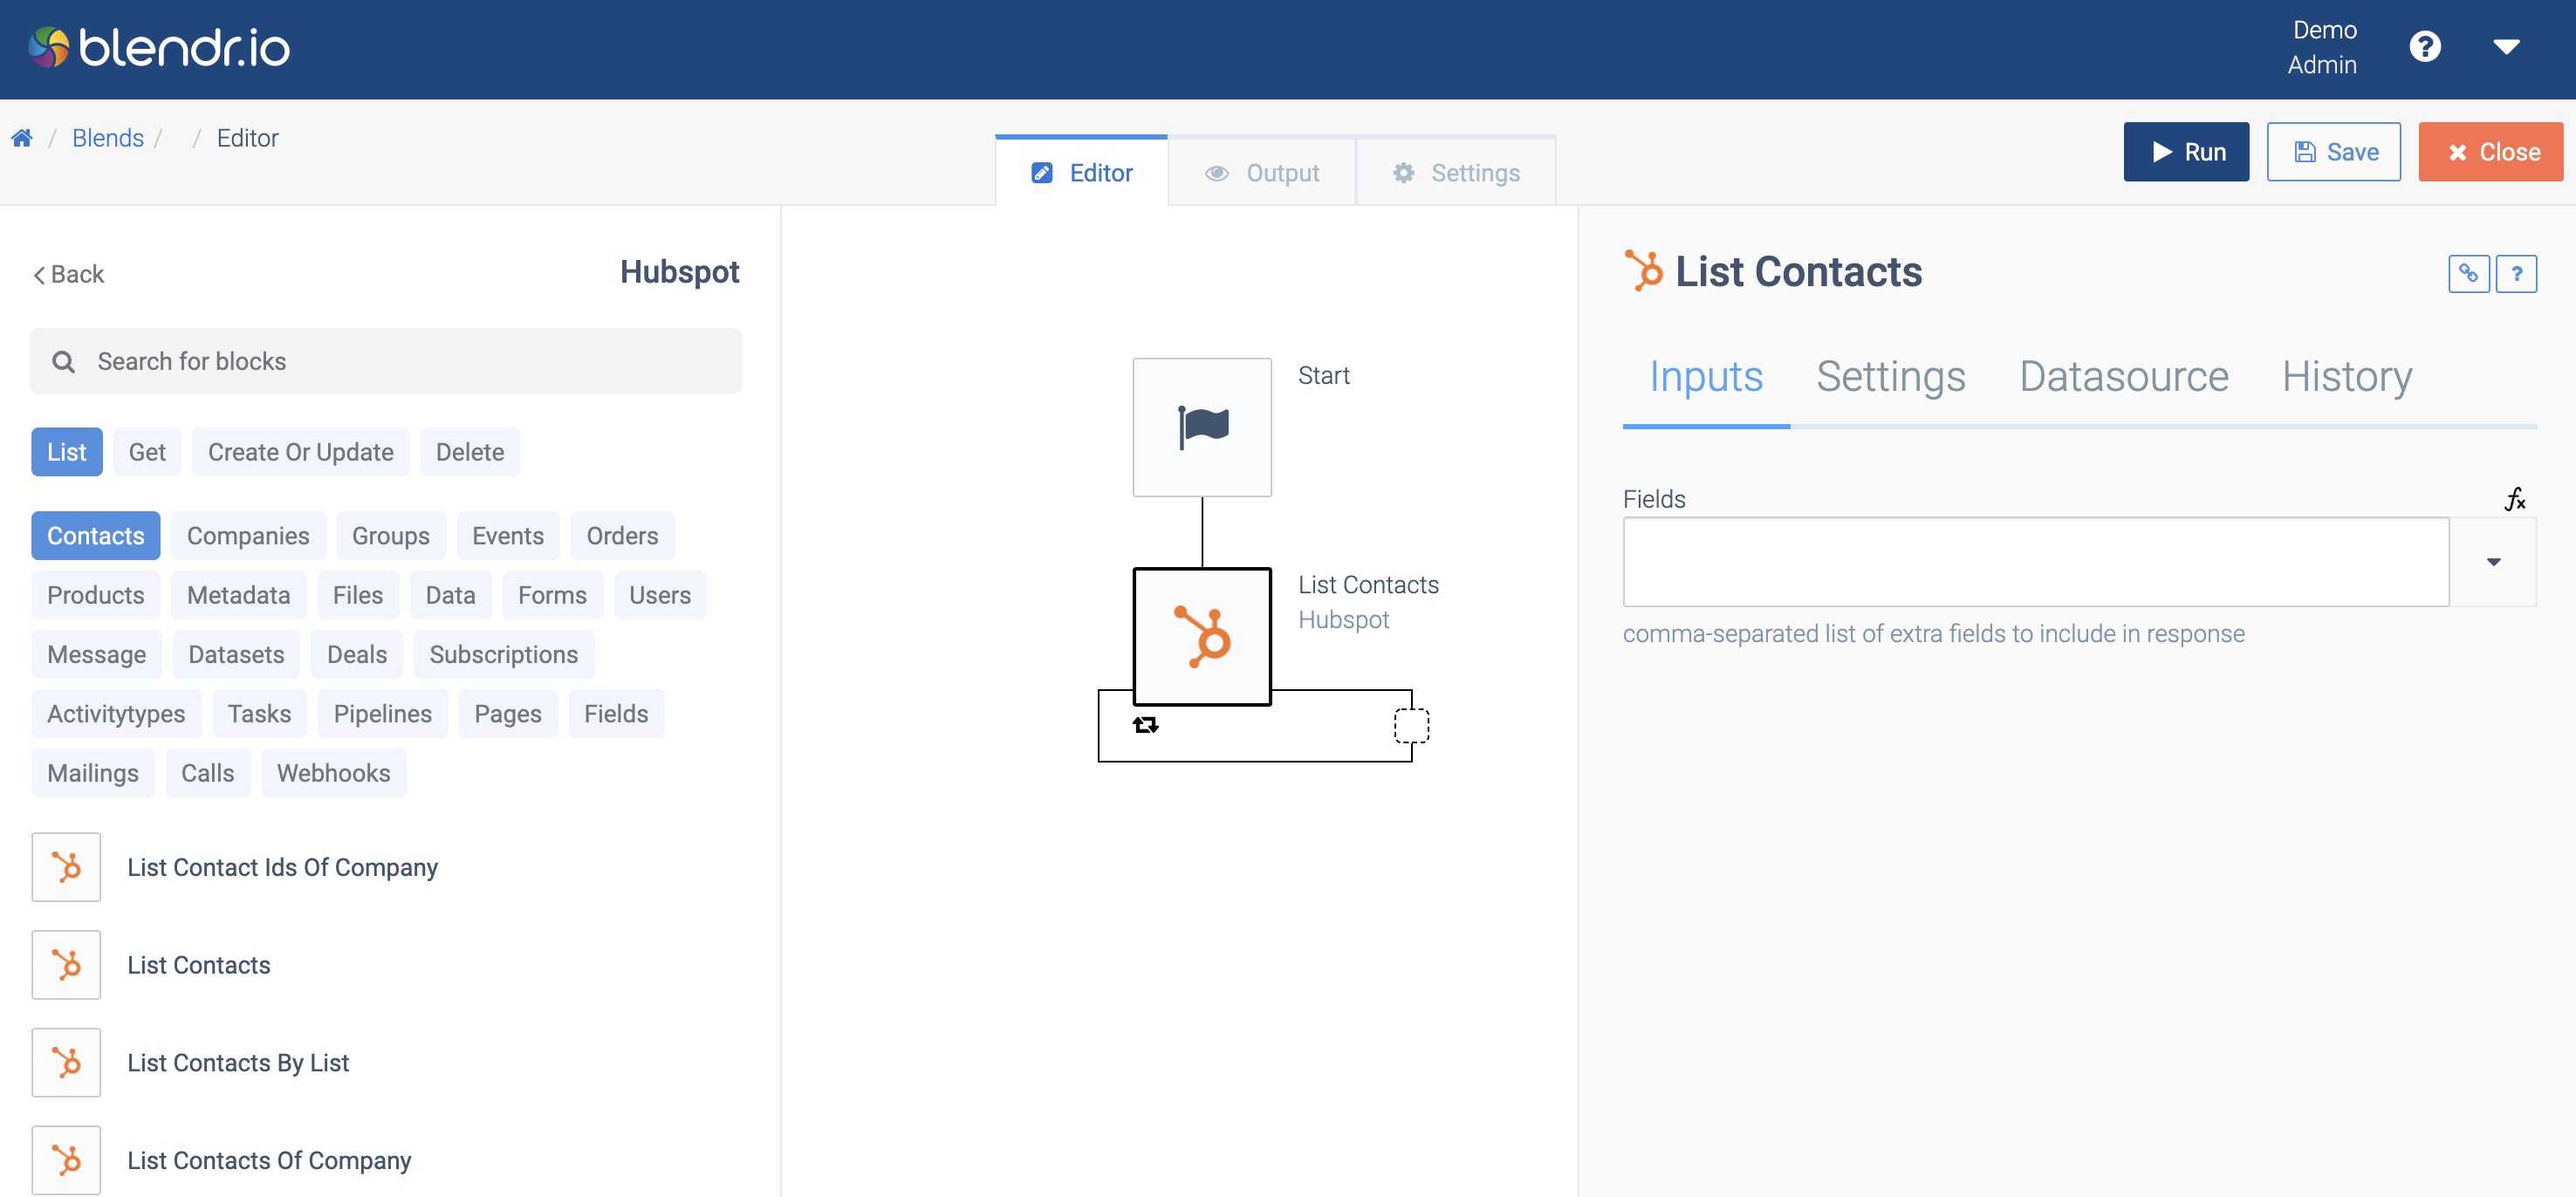 The automation editor. List Contacts: Hubspot has been added to the automation